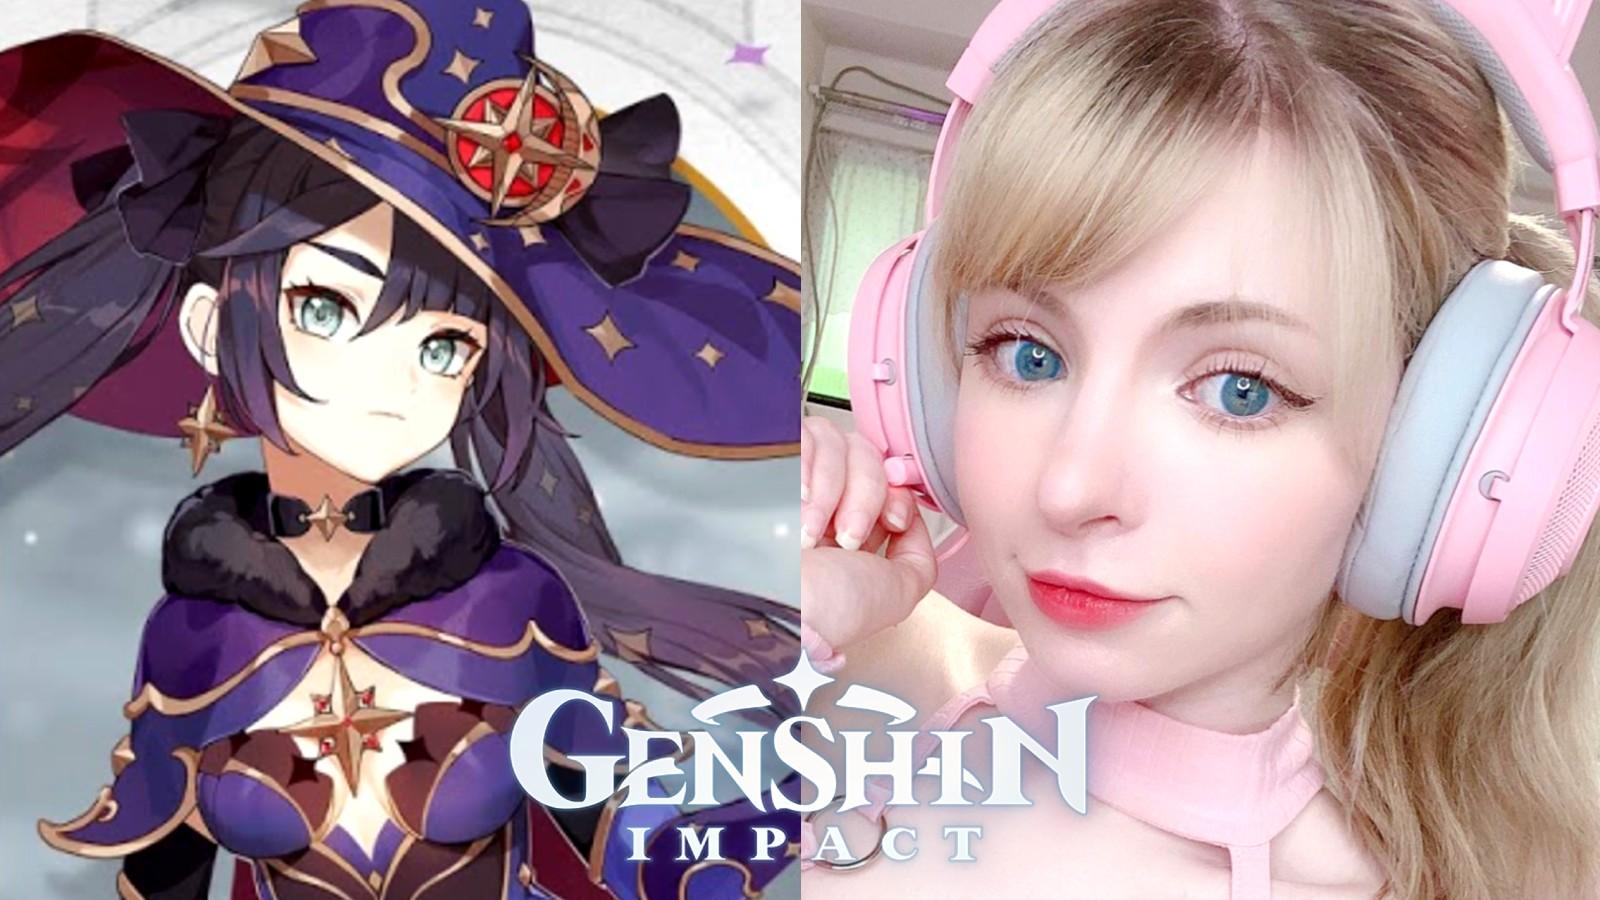 Cosplayer peachmilky_ next to Mona from Genshin Impact